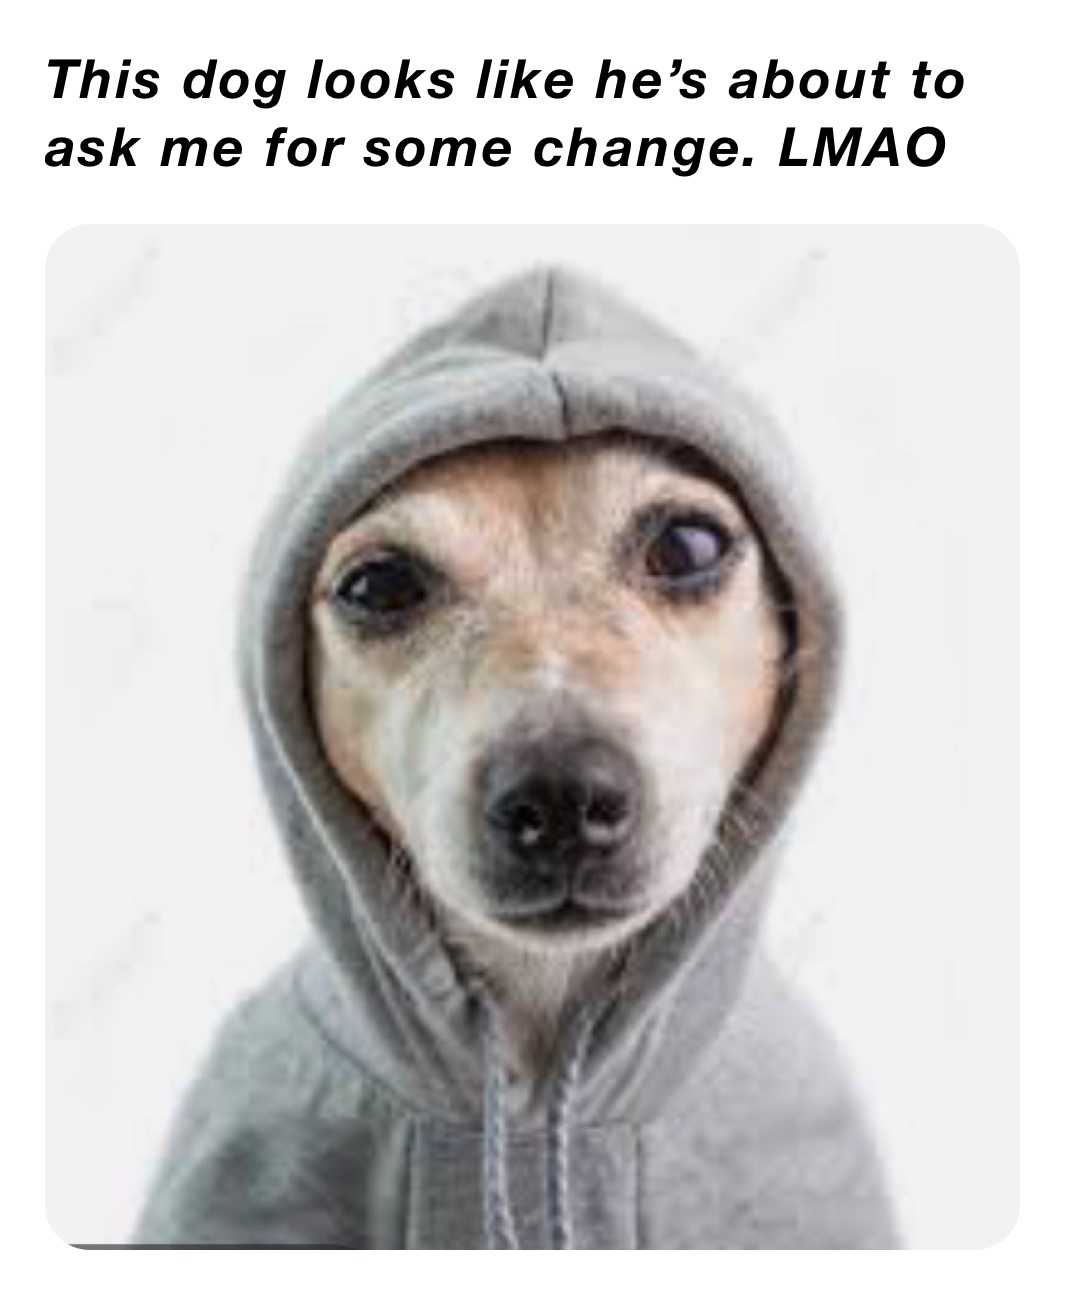 This dog looks like he’s about to ask me for some change. LMAO